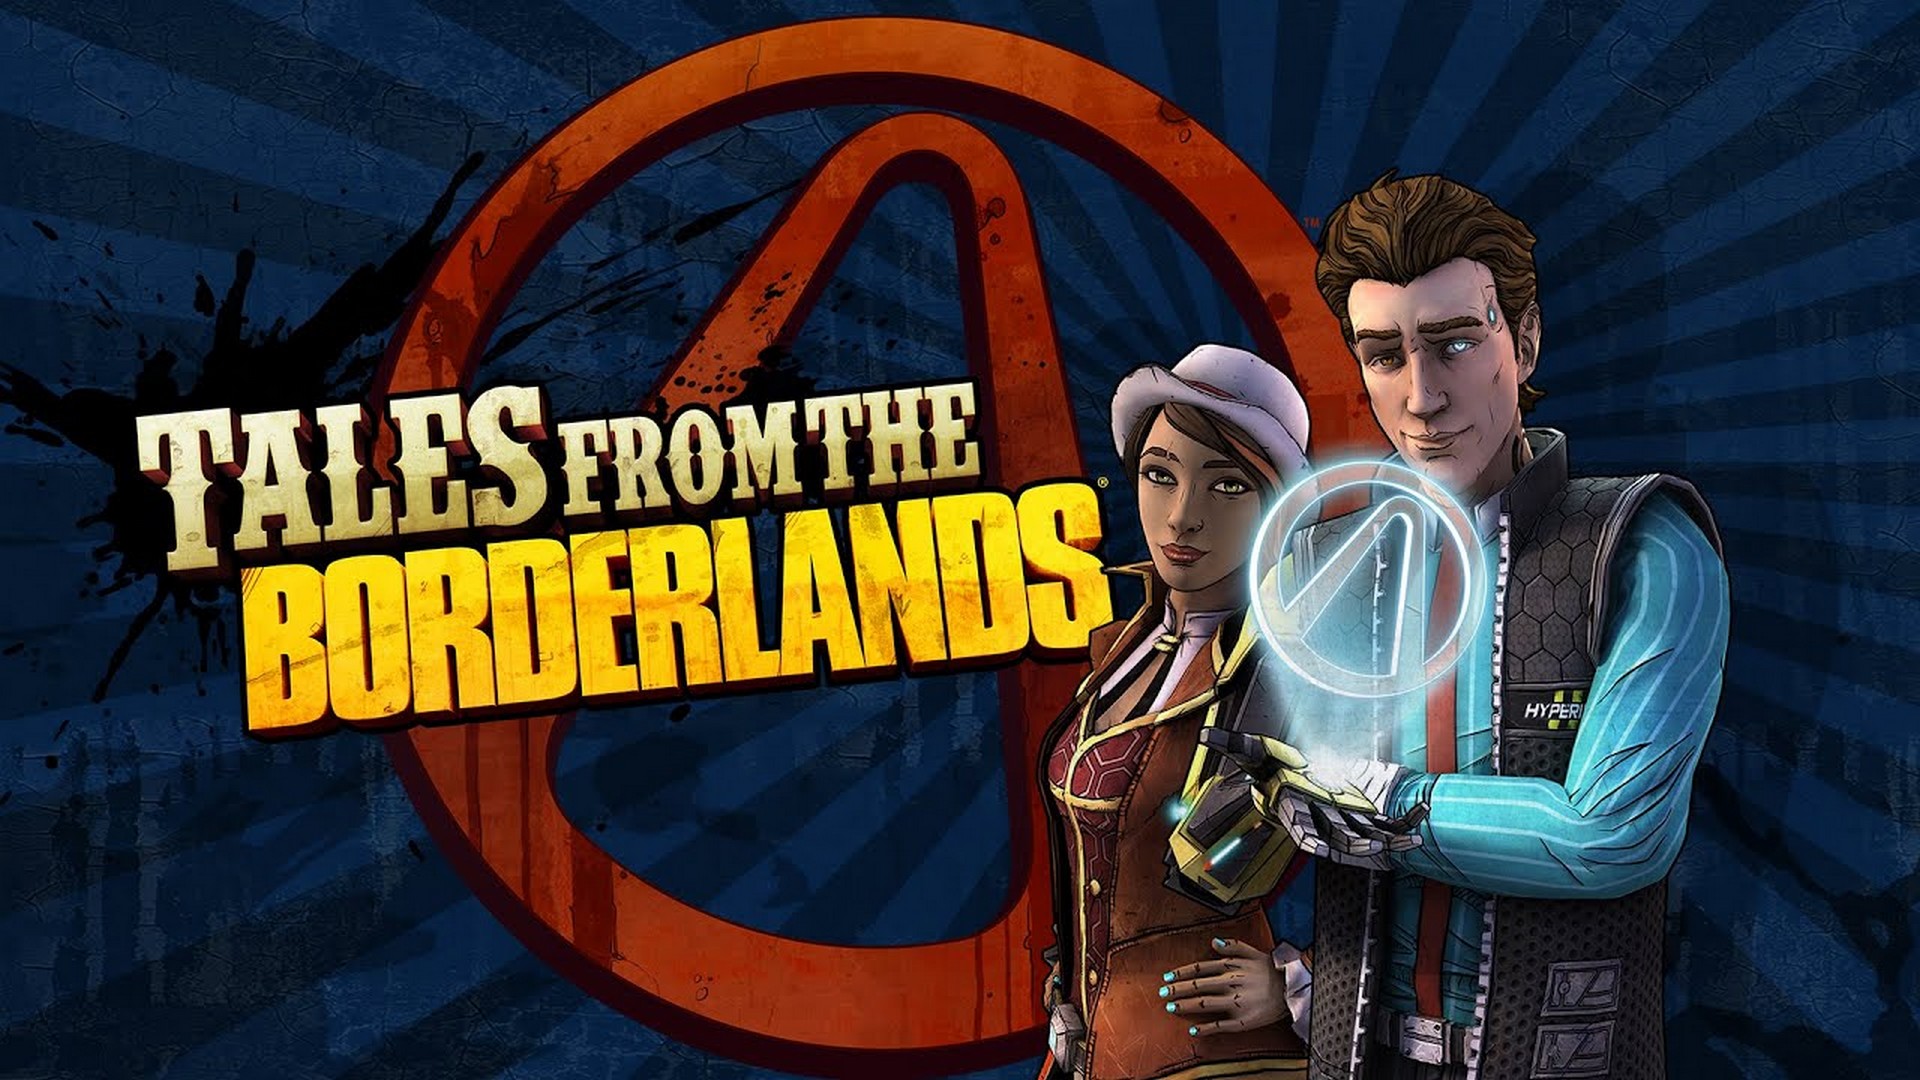 Tales From The Borderlands Now Available On Nintendo Switch At A Special Introductory Price